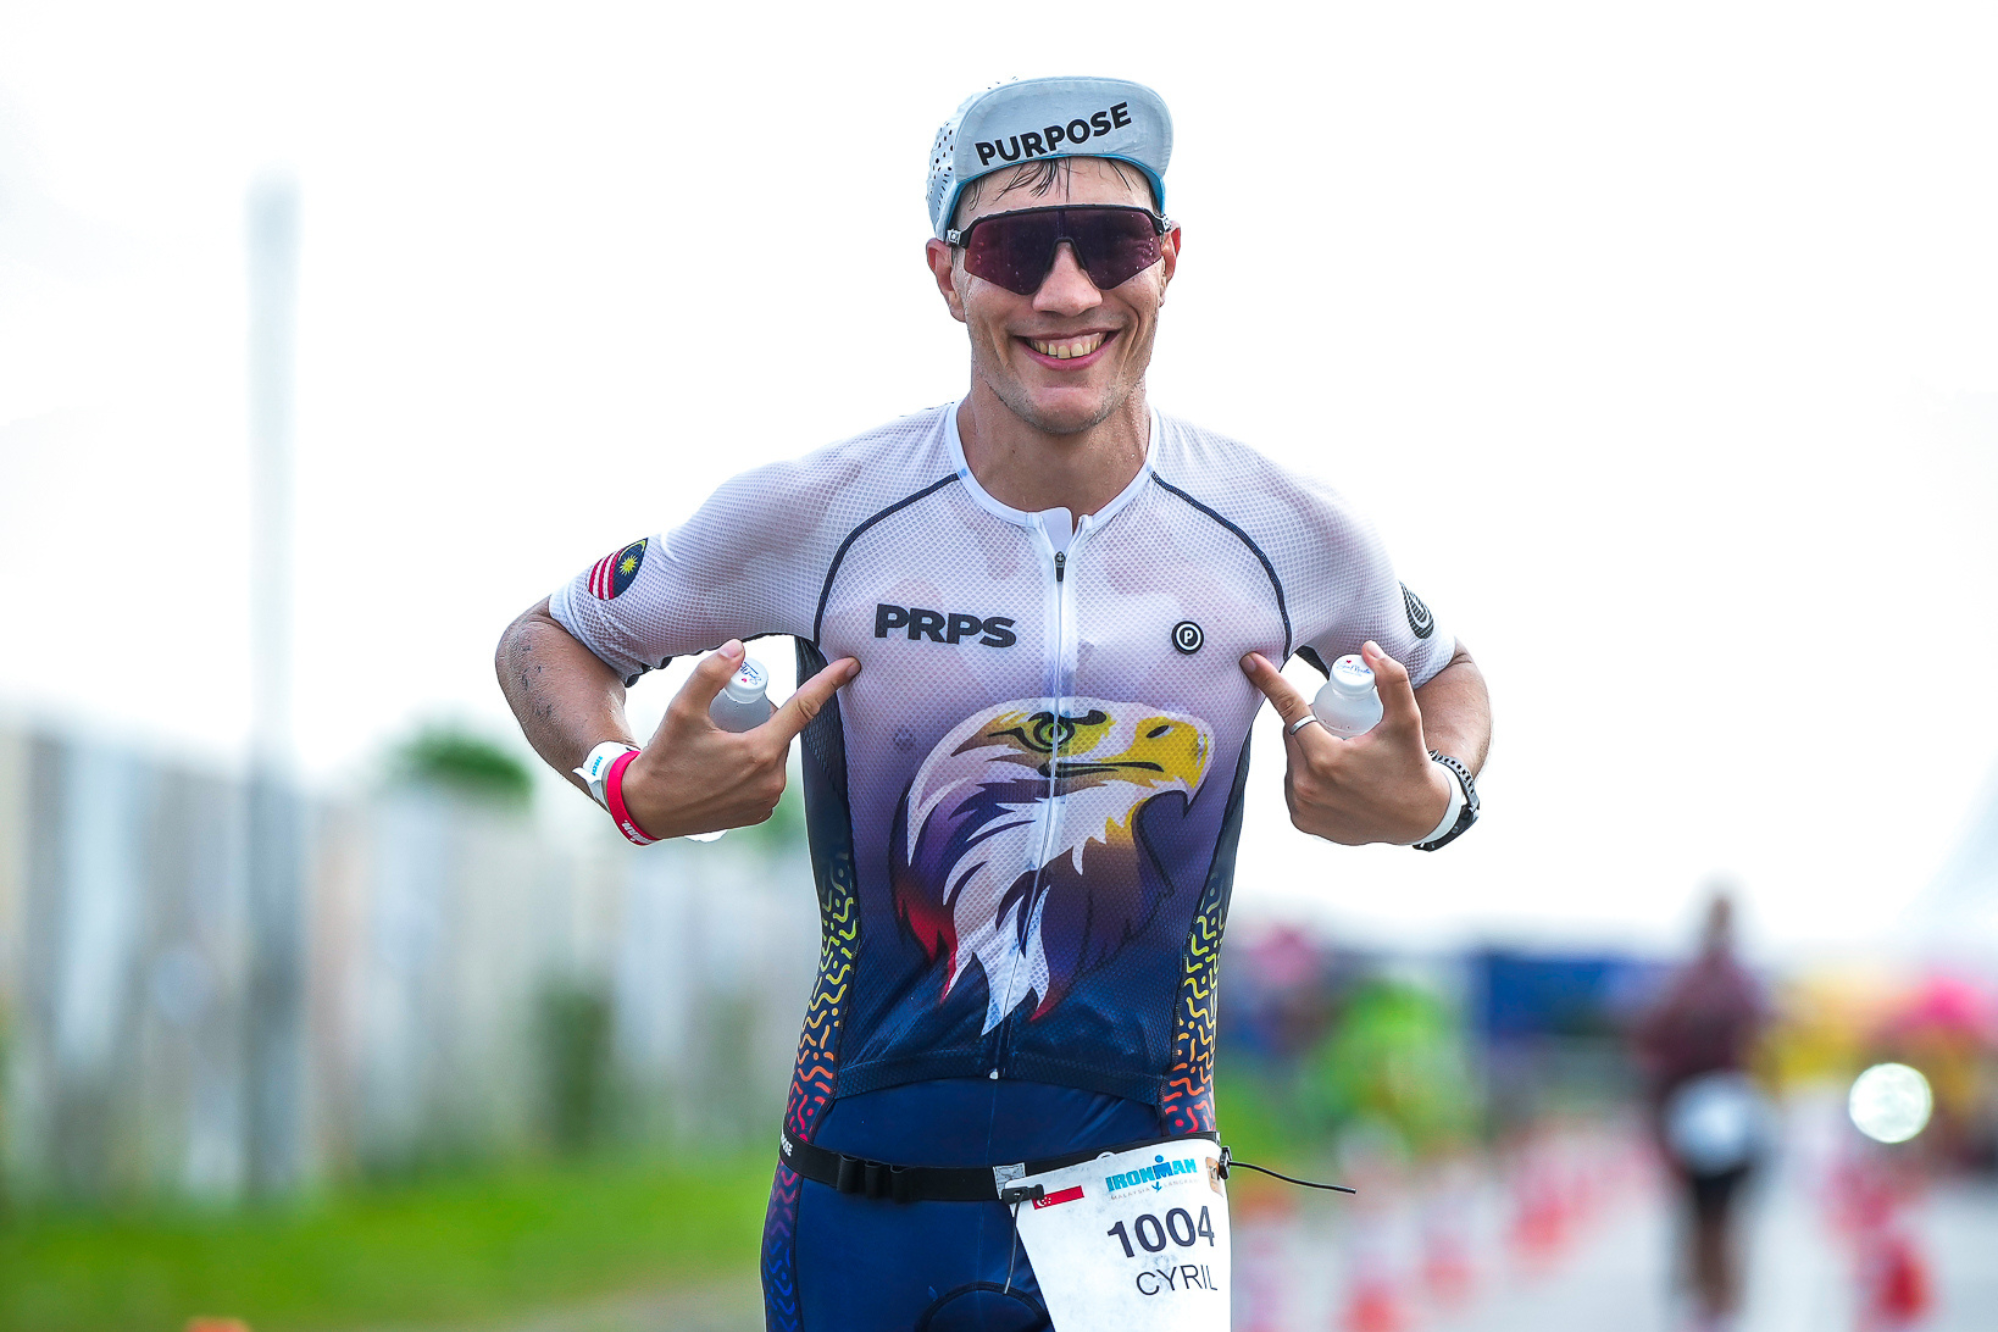 Triathlete & CEO: The Extraordinary Life of Cyril Bedat